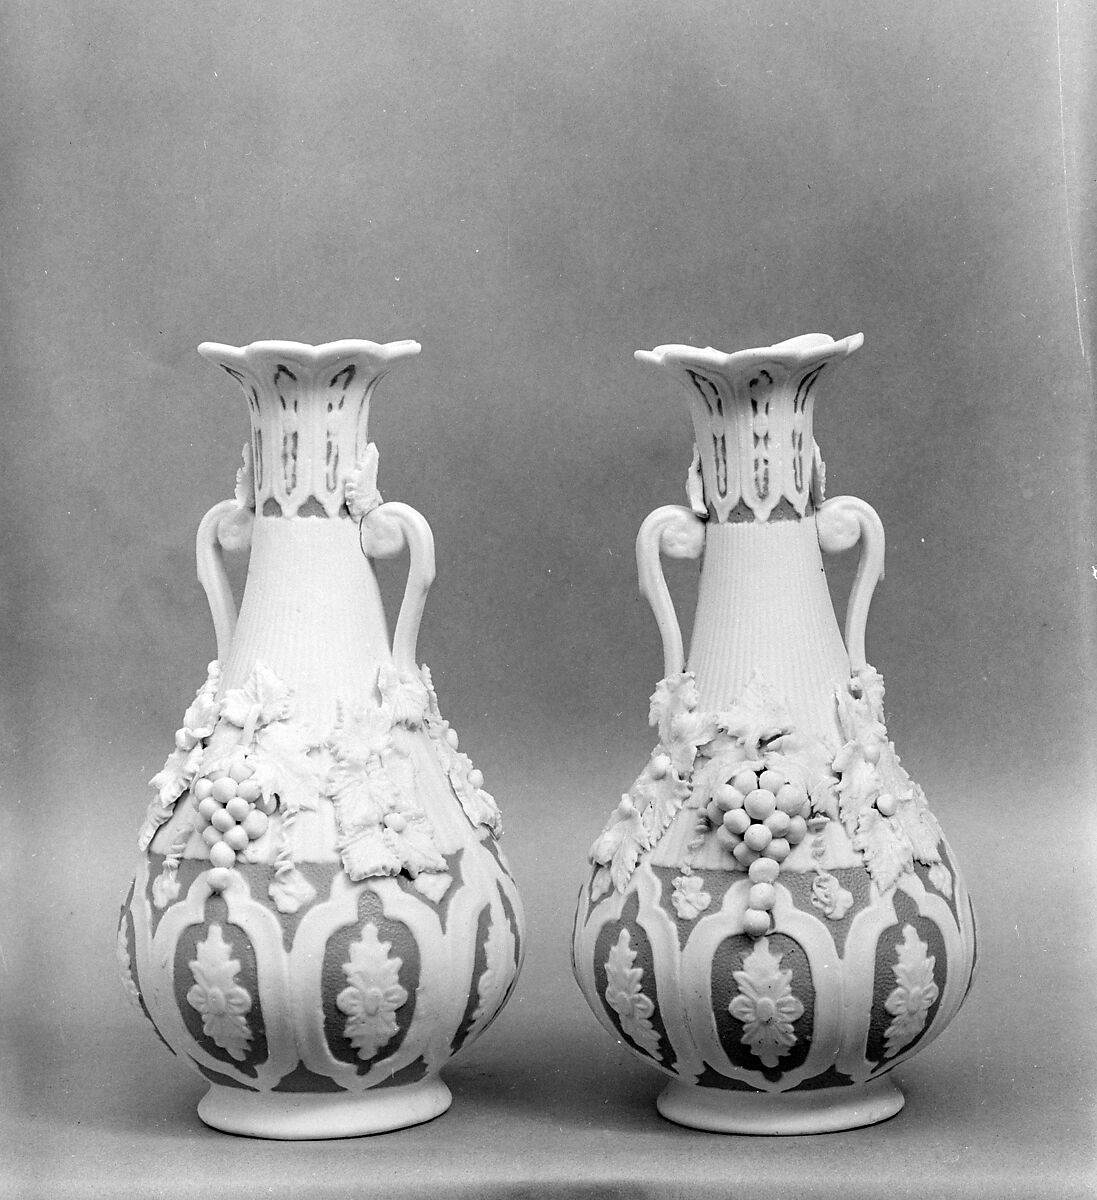 Vase, United States Pottery Company (1852–58), Parian porcelain, American 